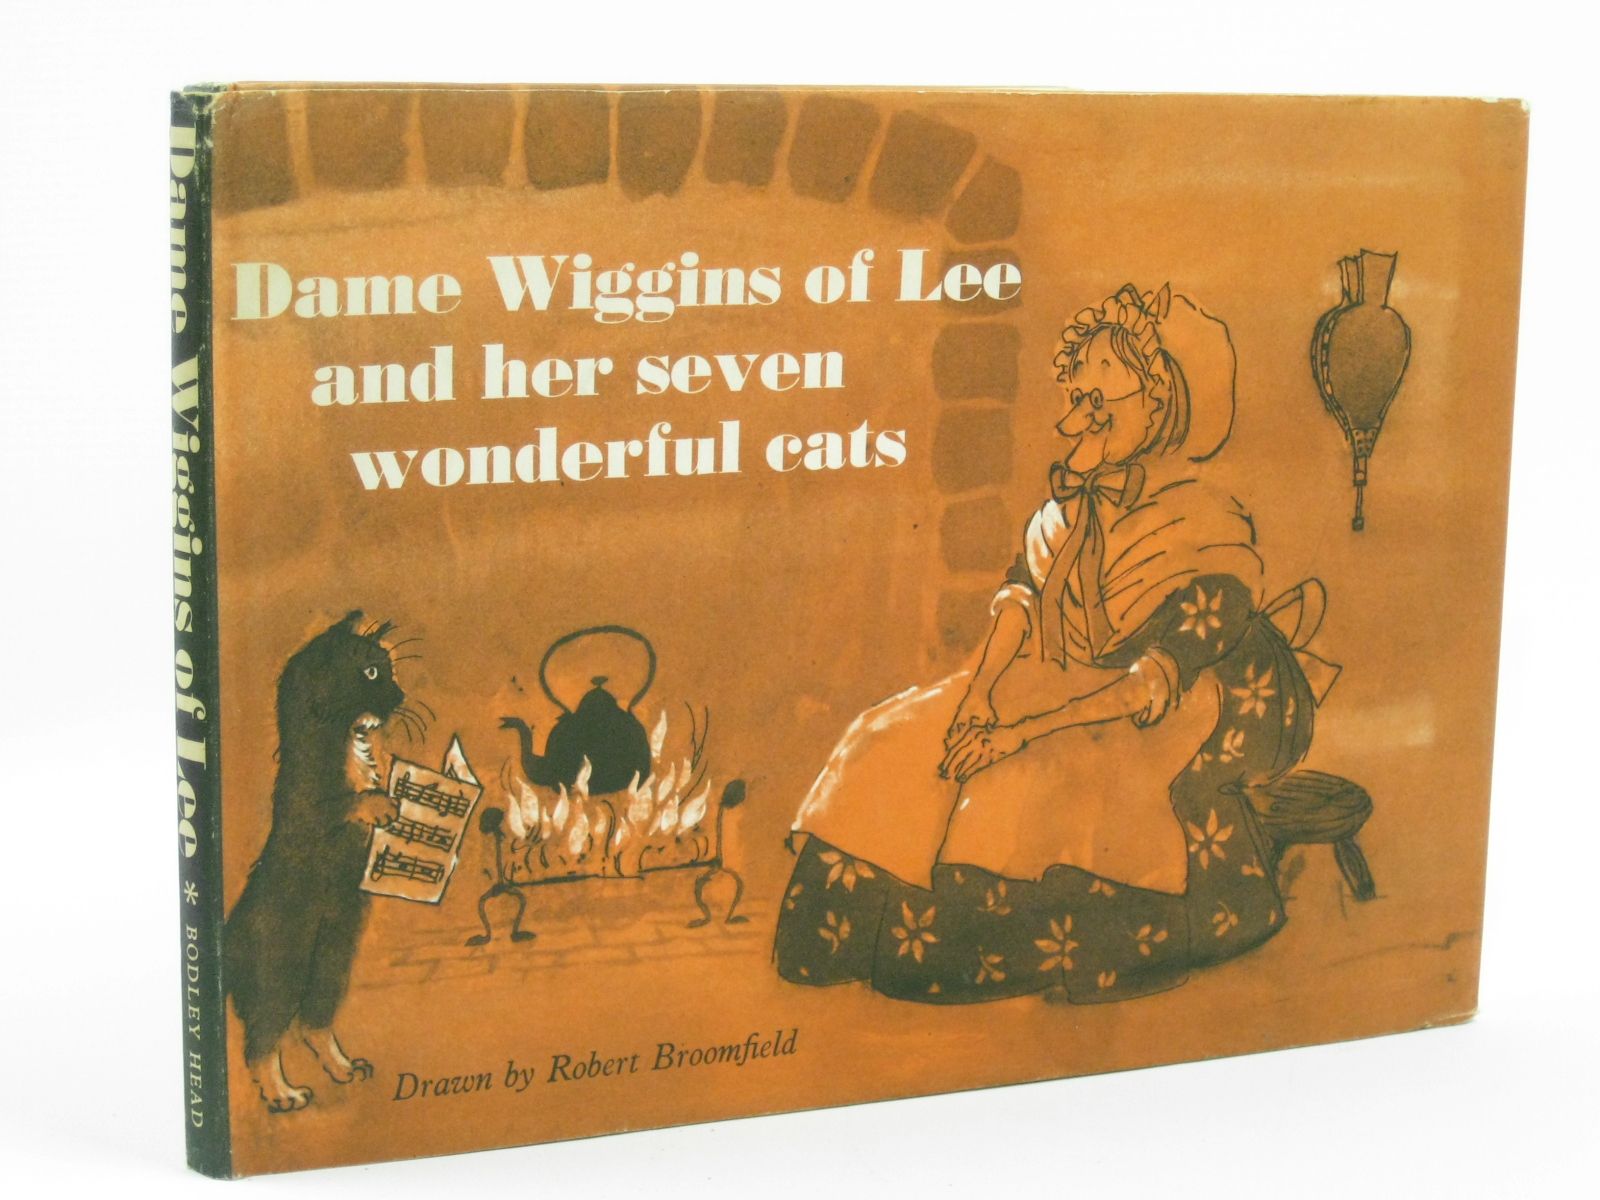 Photo of DAME WIGGINS OF LEE AND HER SEVEN WONDERFUL CATS- Stock Number: 1506506